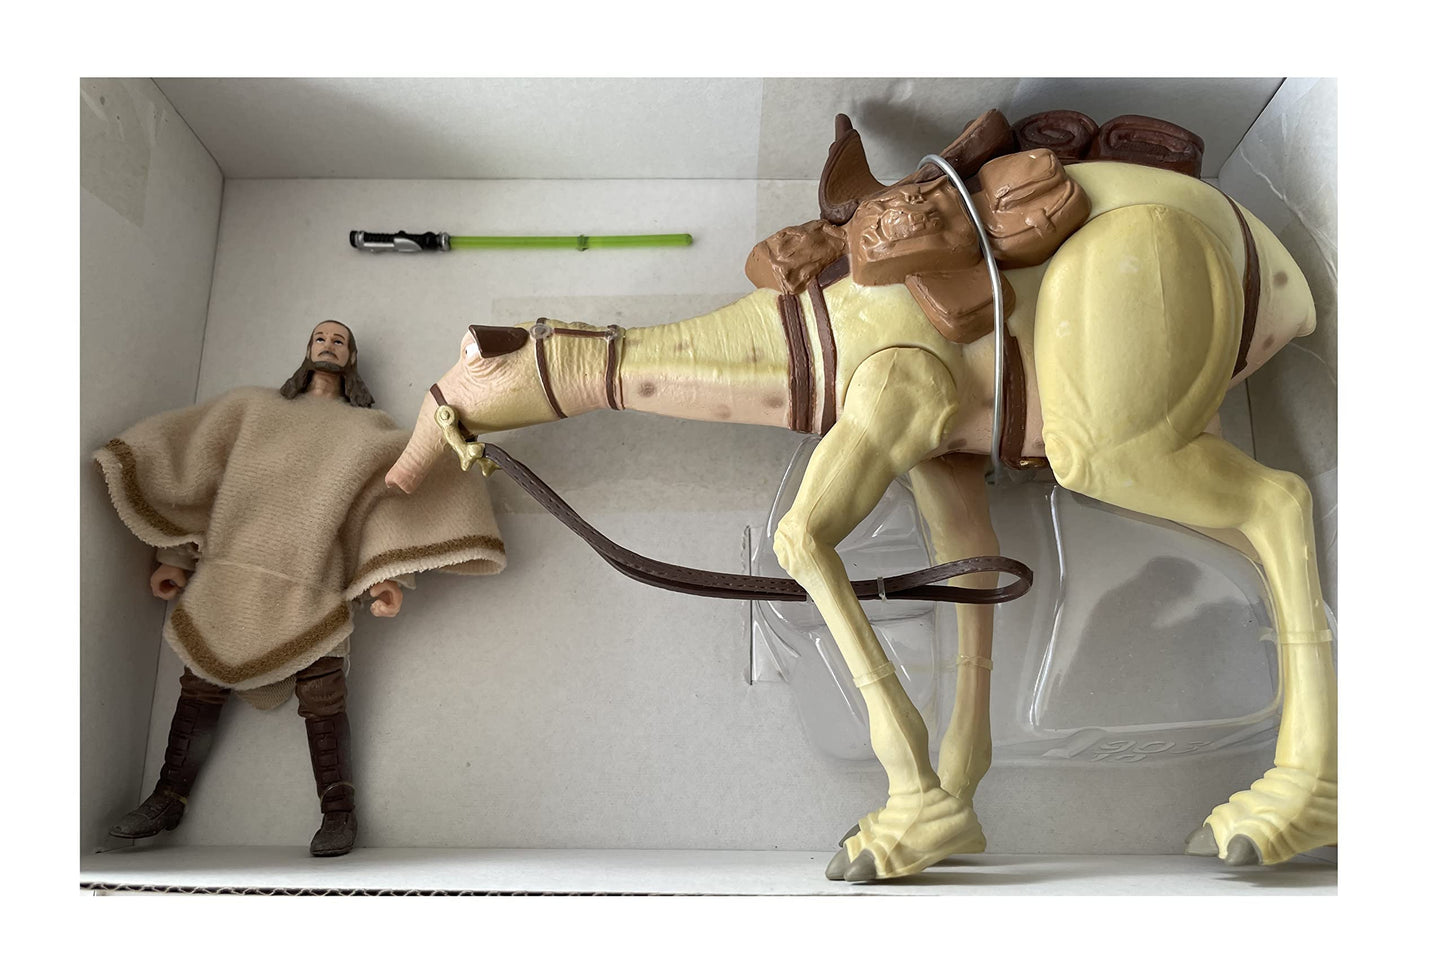 Vintage 2009 Star Wars The Legacy Collection Episode 1 The Phantom Menace Qui-Gon Jinn And Eopie Action Figure Box Set - In The Original Mailer Box